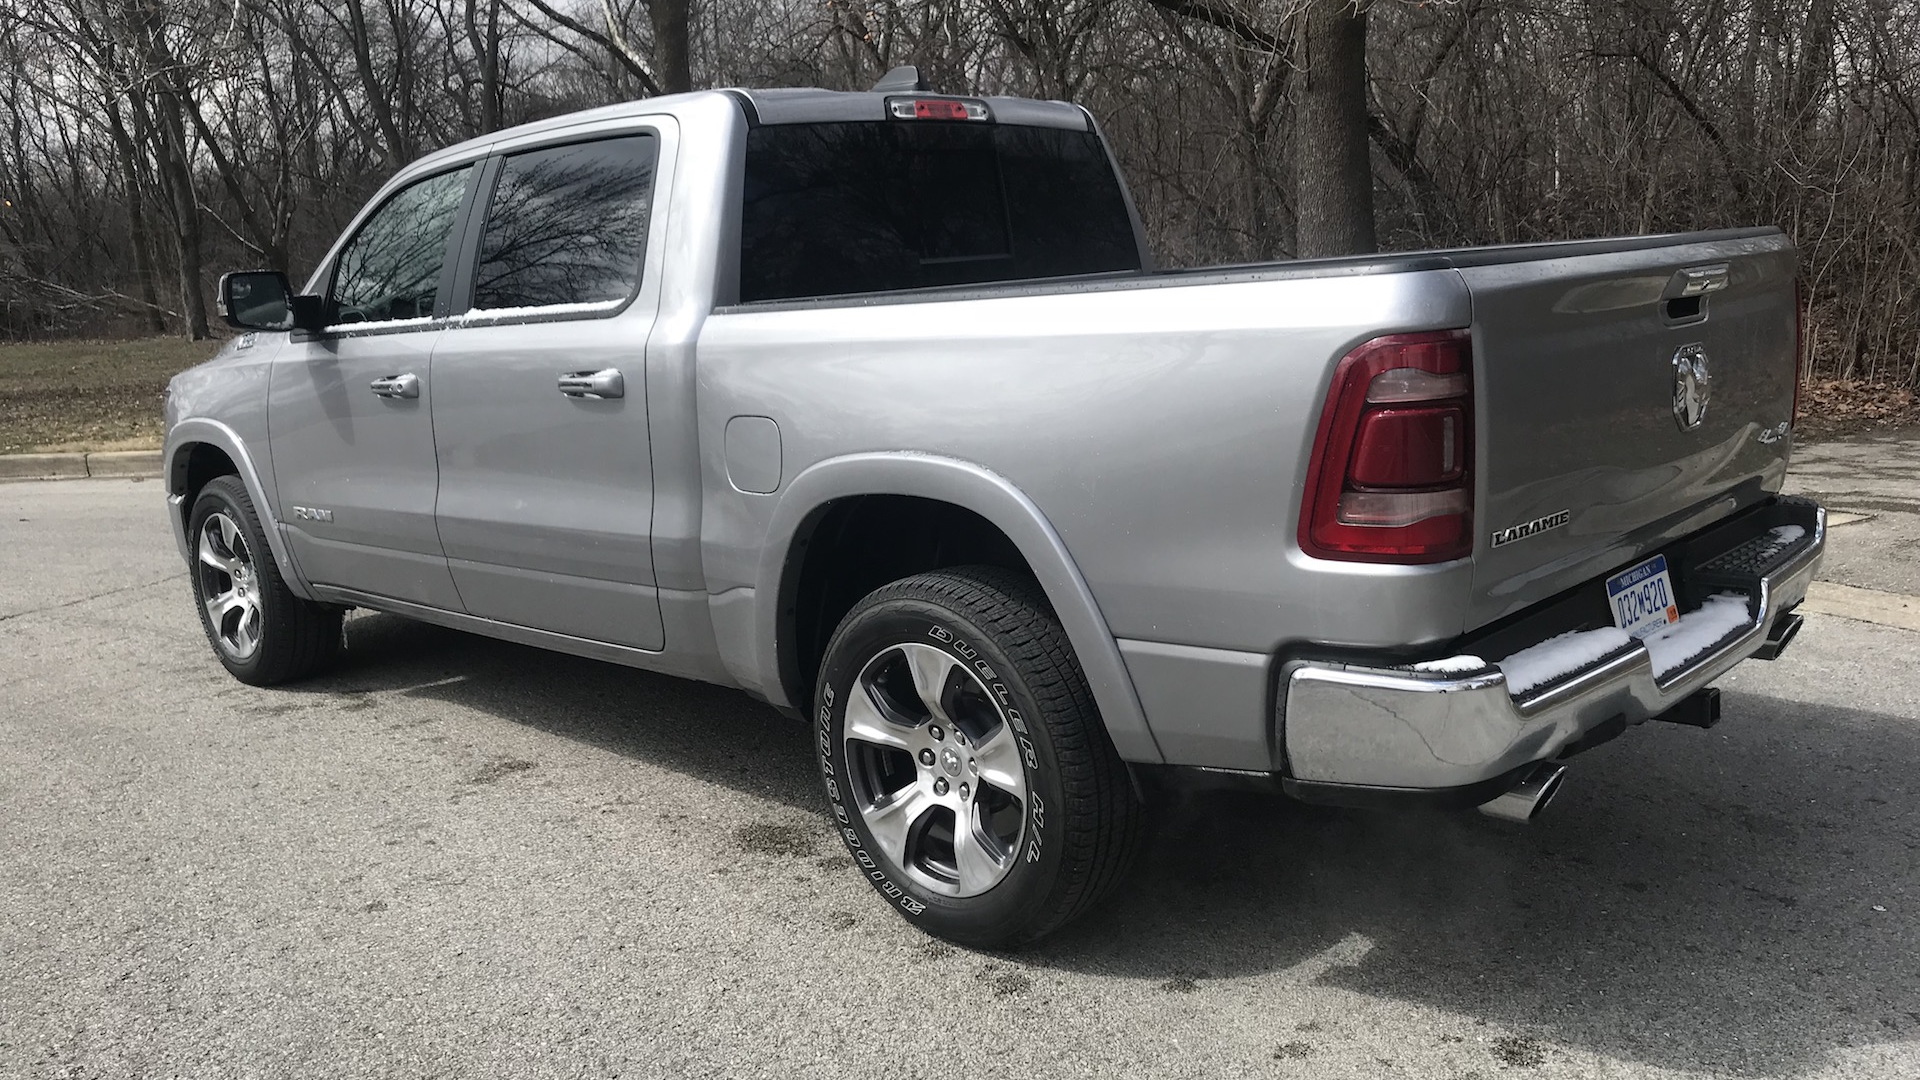 Living and working with the 2019 Ram 1500